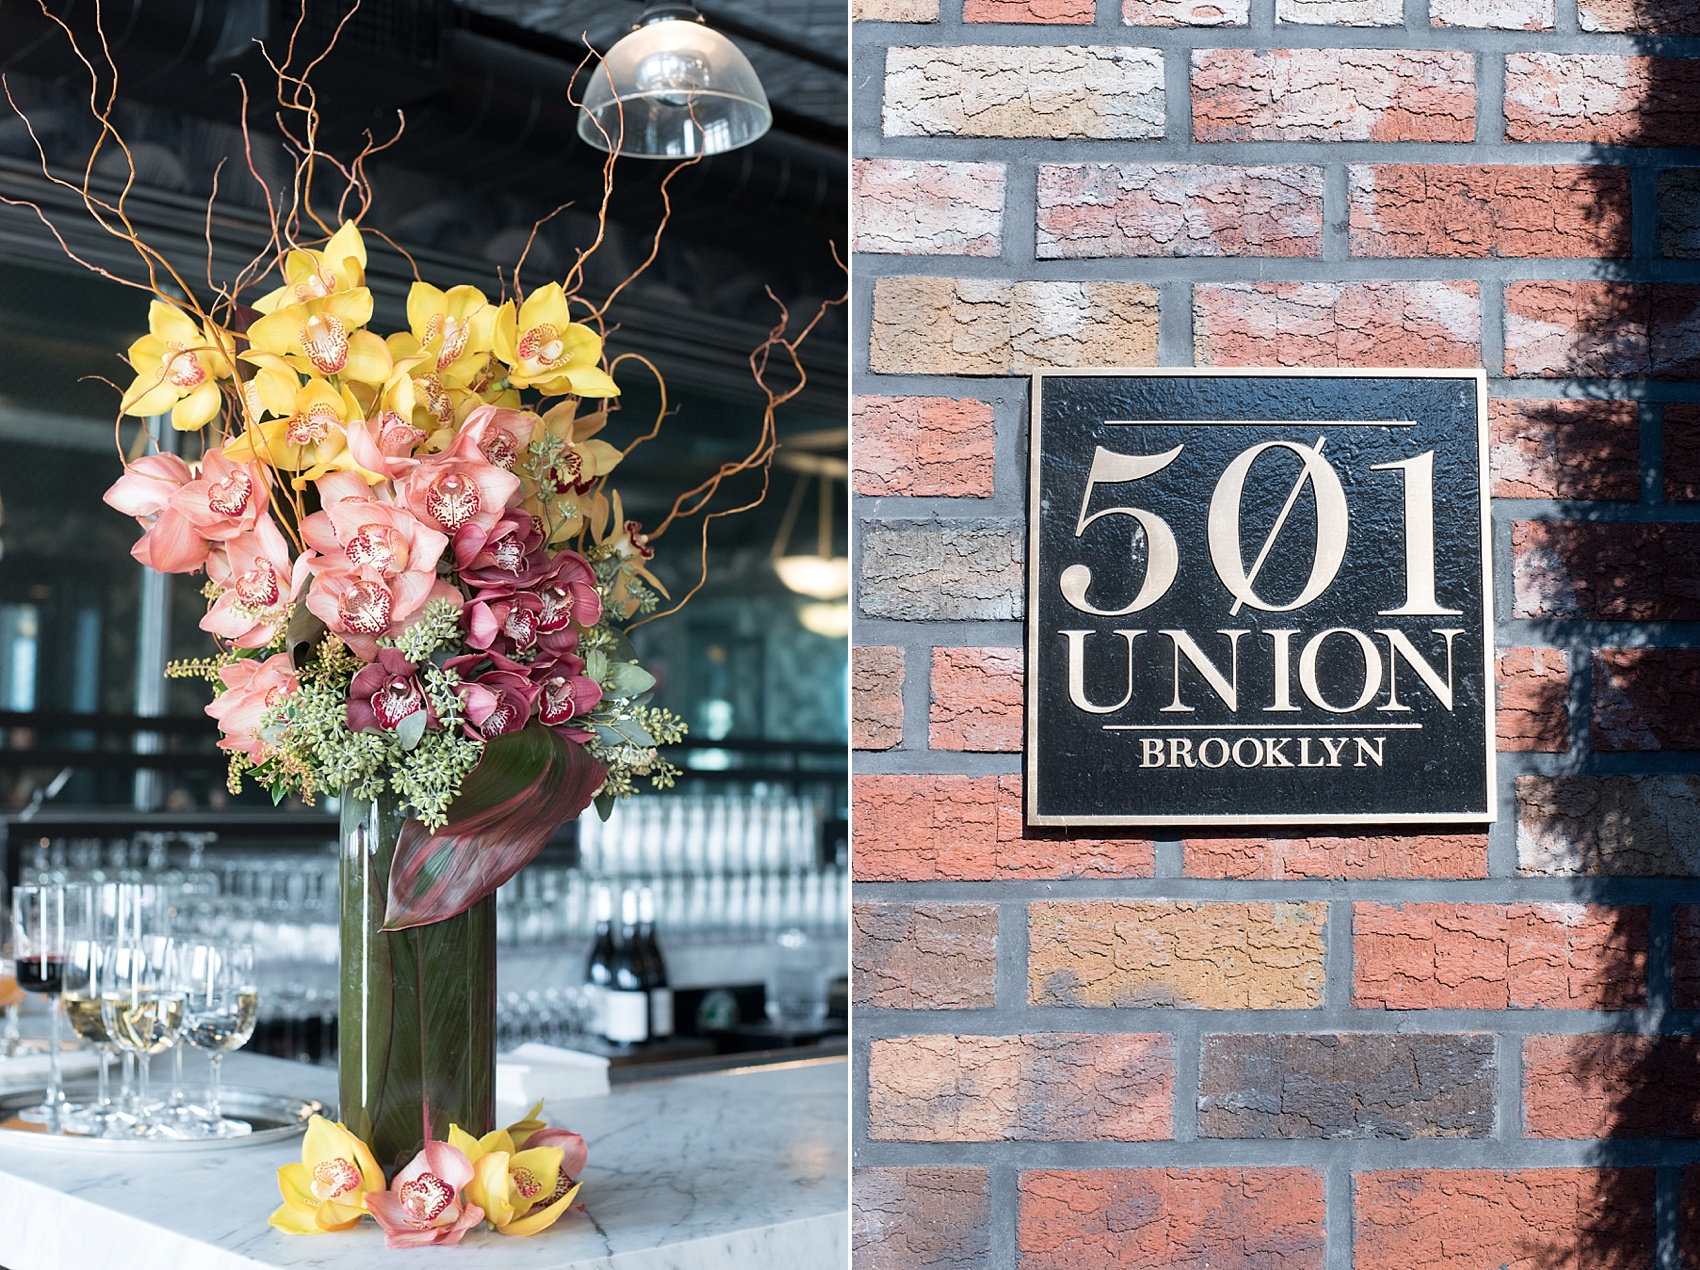 Photo by Mikkel Paige, Brooklyn wedding photographer. Flowers by The Arrangement NYC fall and autumn orchid ombre centerpieces at 501 Union.